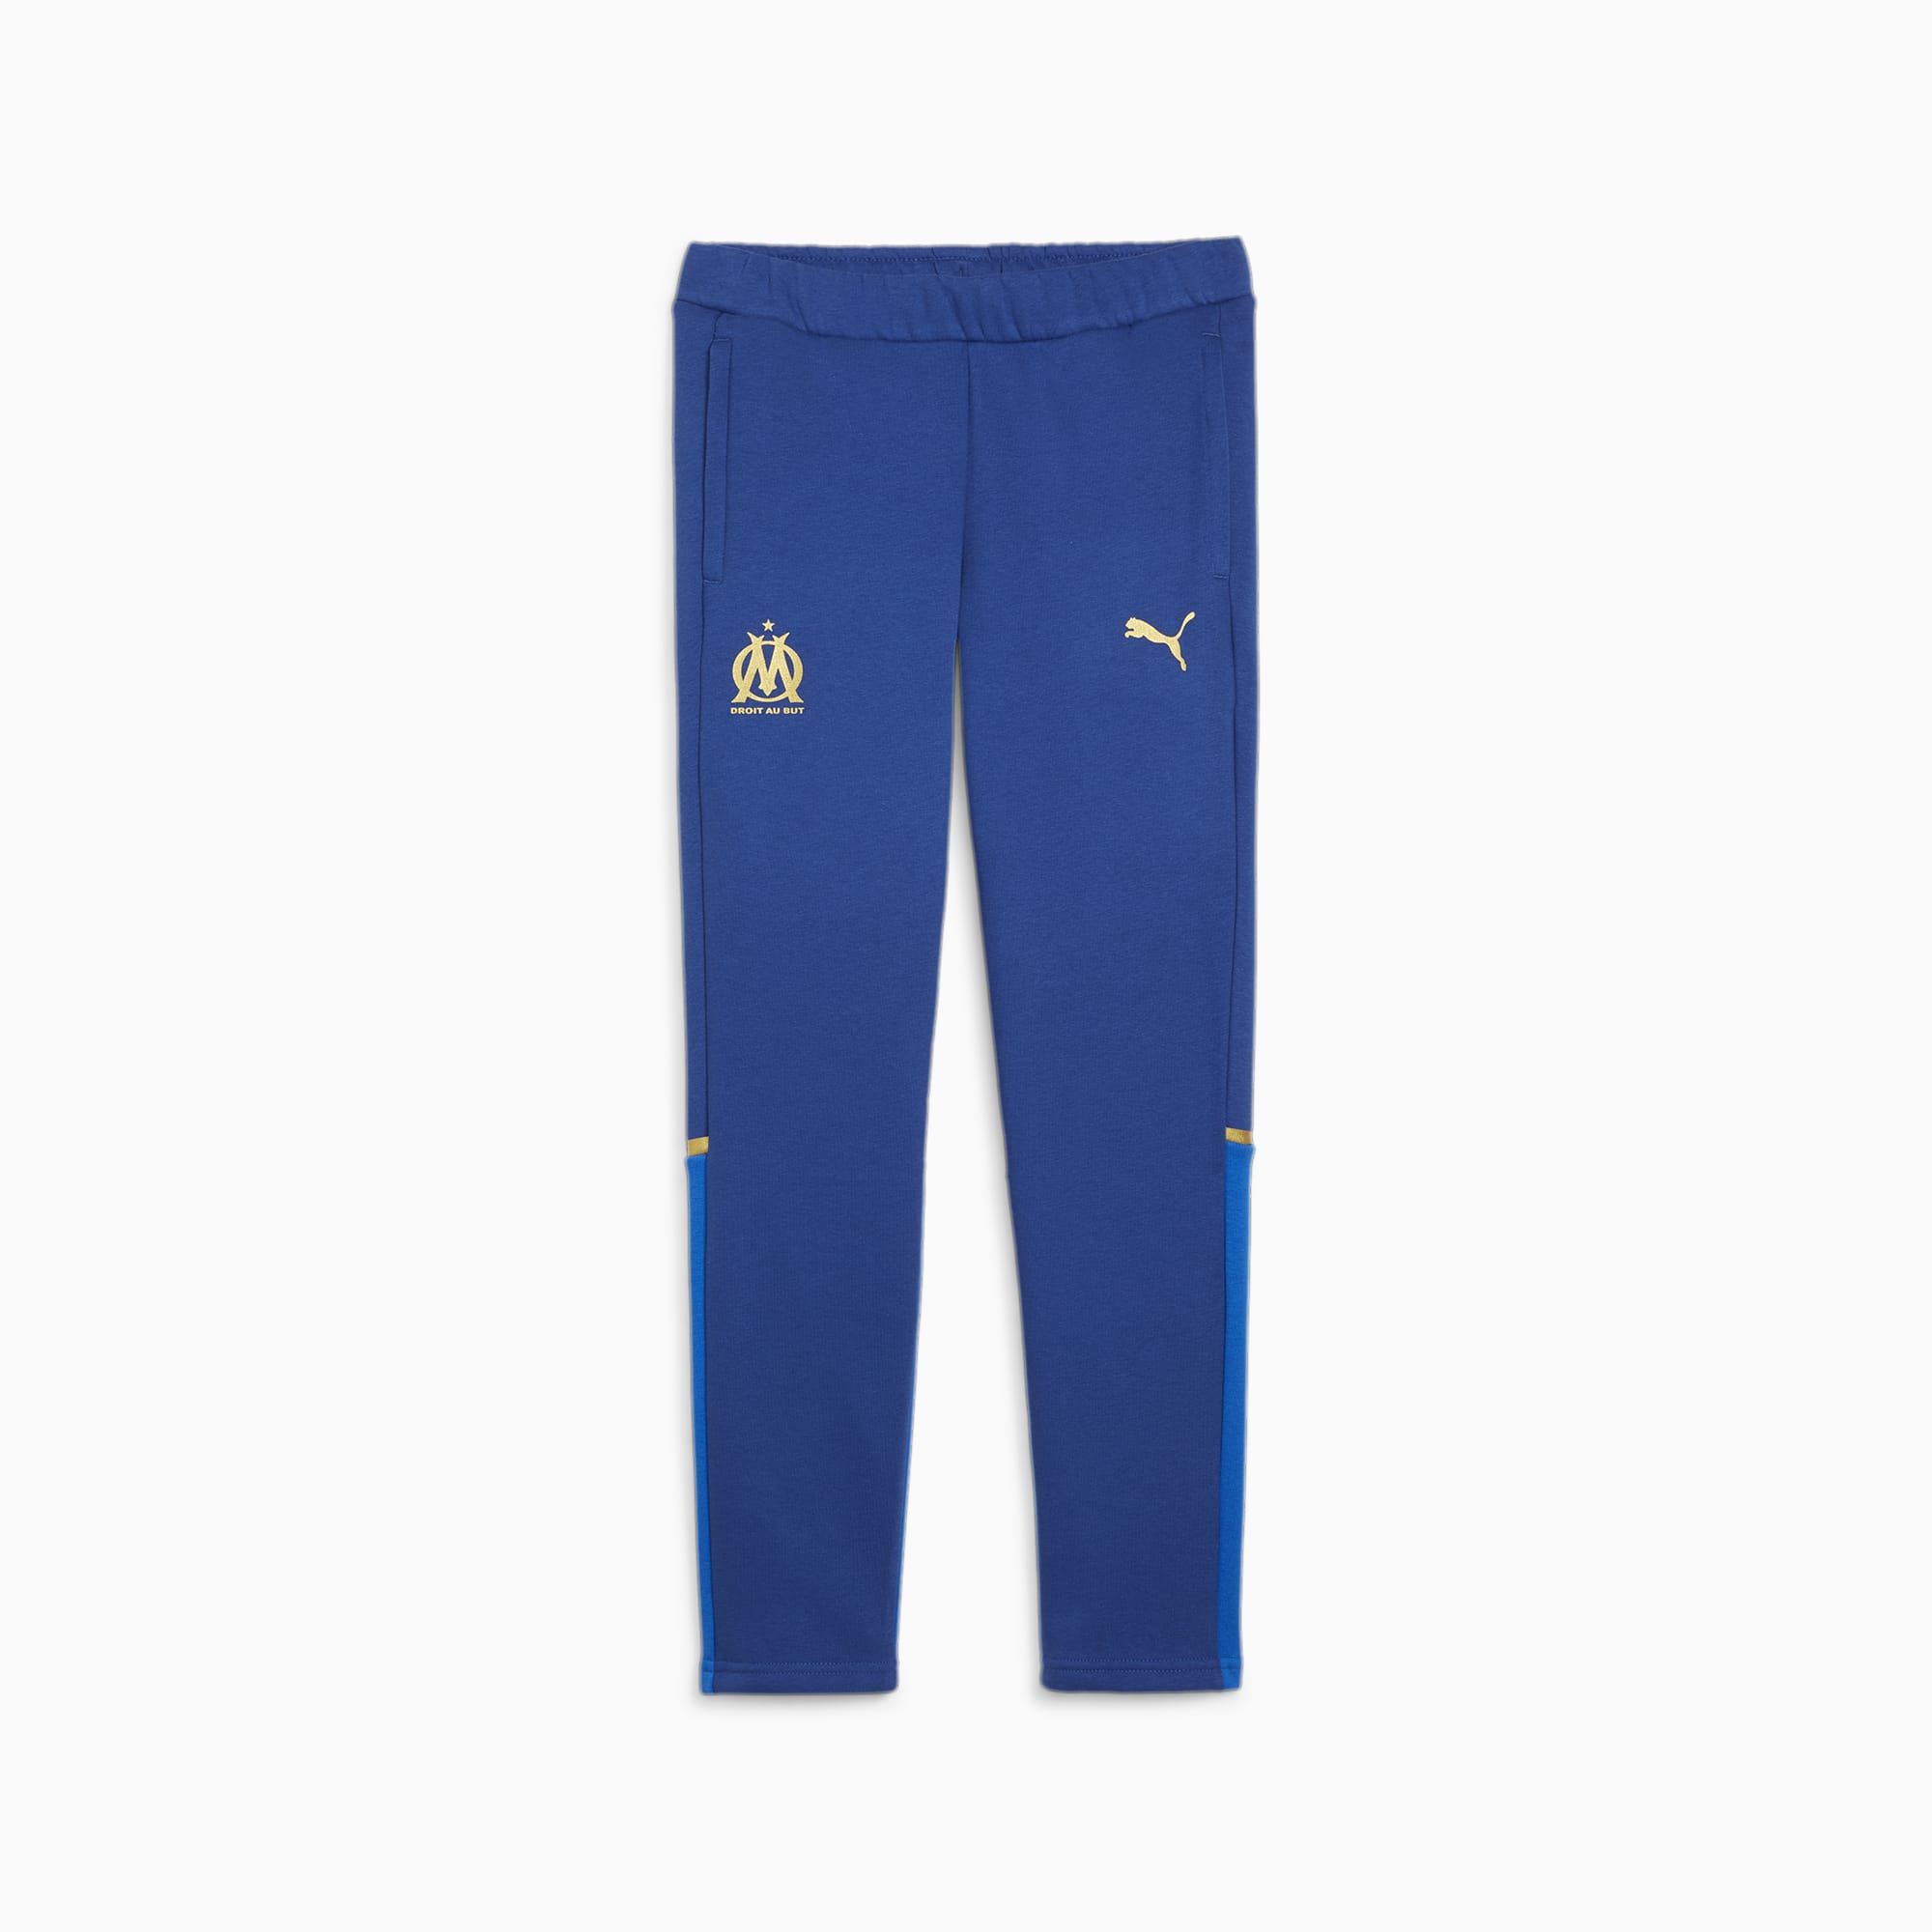 PUMA Olympique De Marseille Football Casuals Youth Sweatpants, Royal Blue, Size 110, Accessories